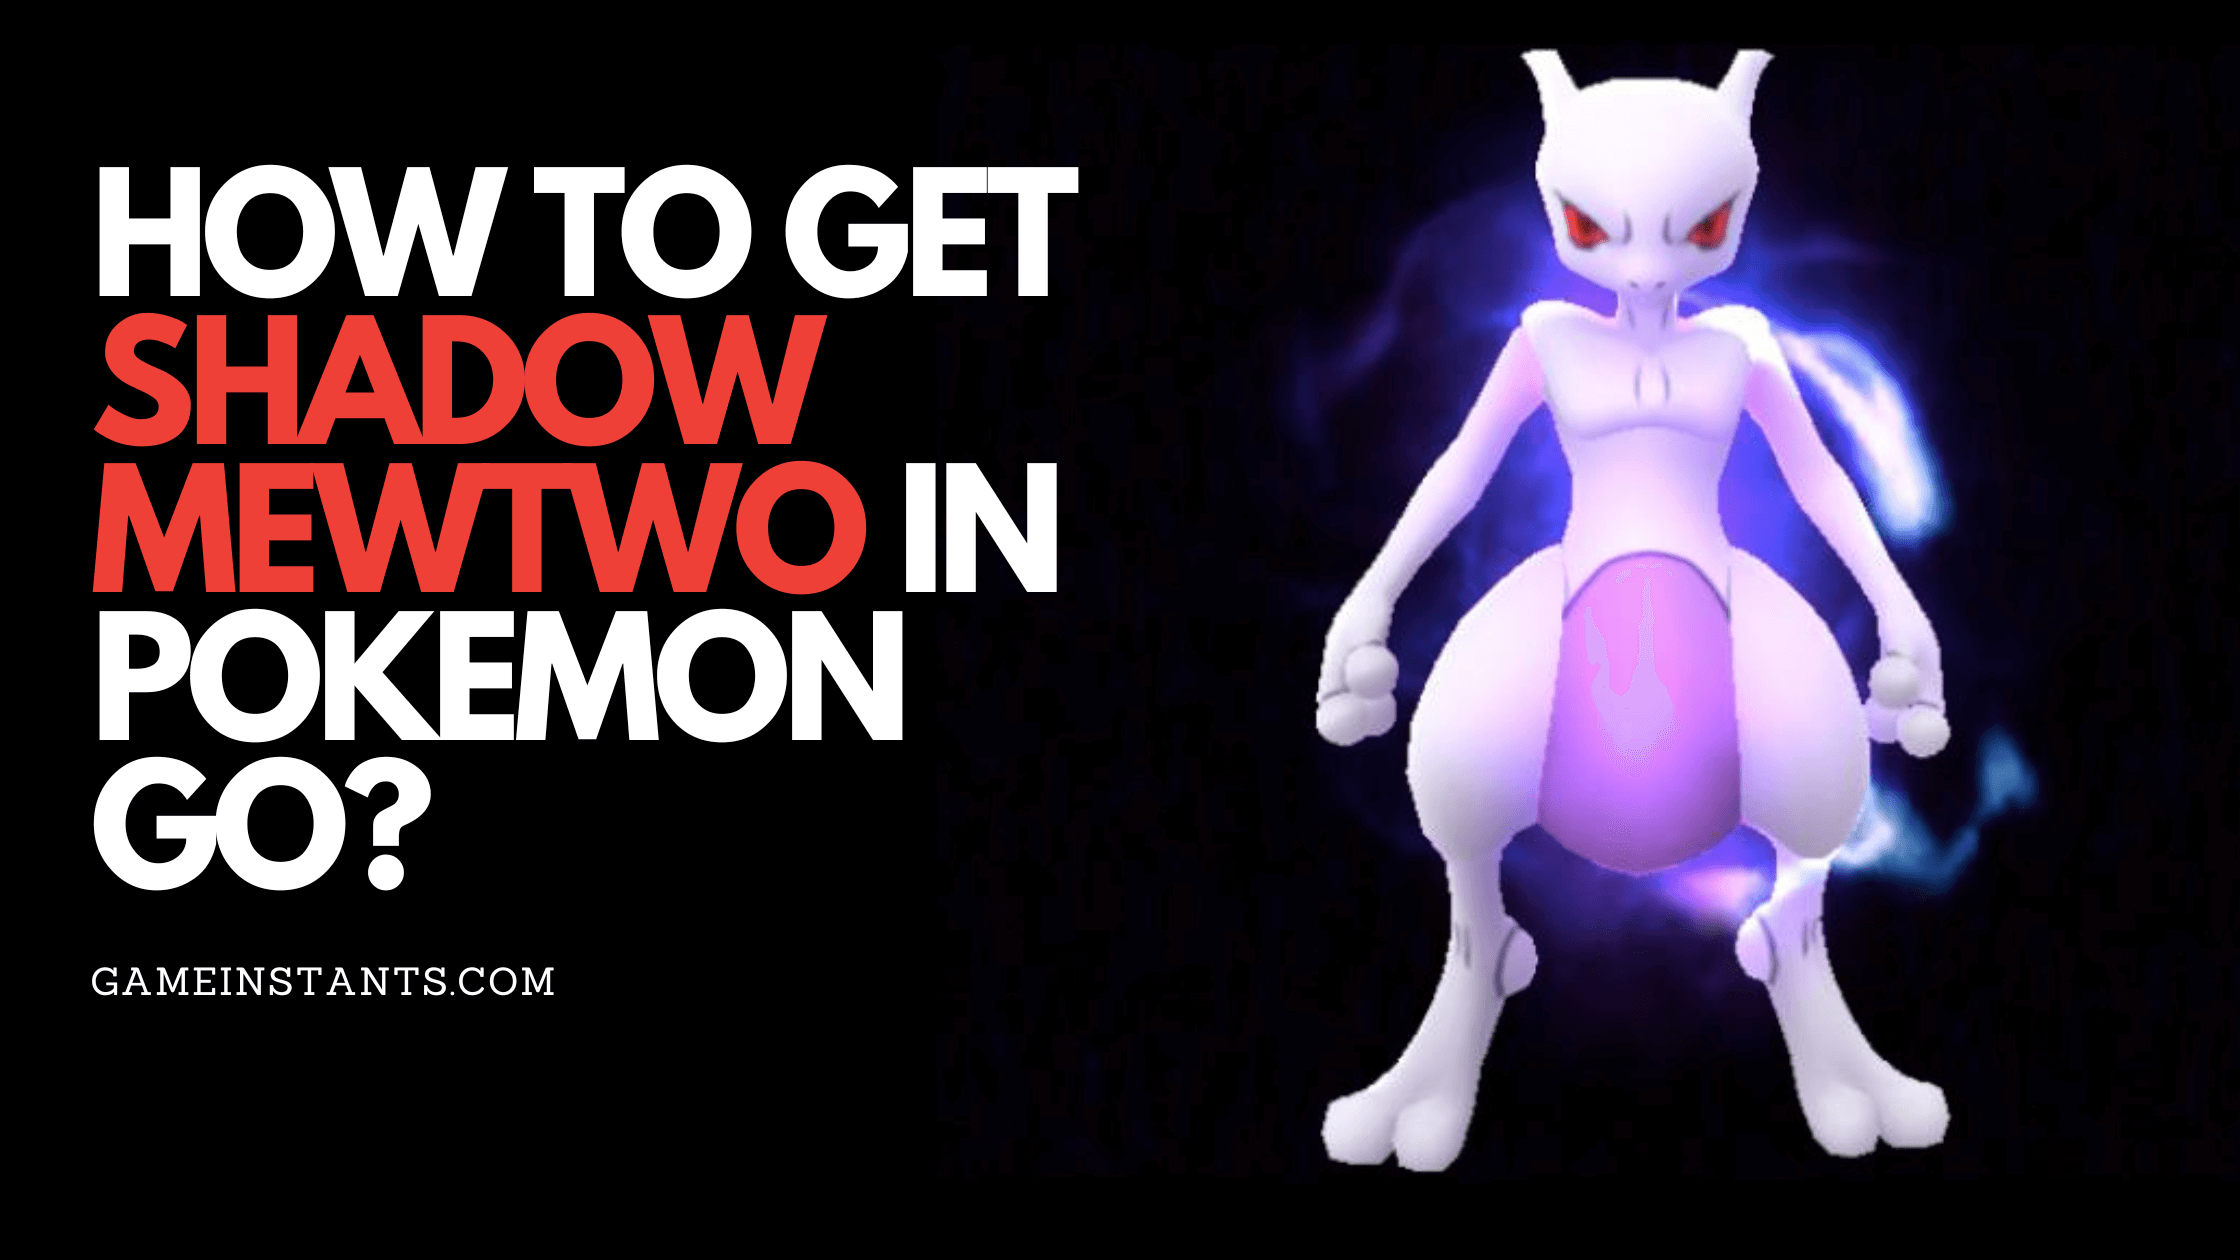 How To Get Shadow Mewtwo in Pokemon Go